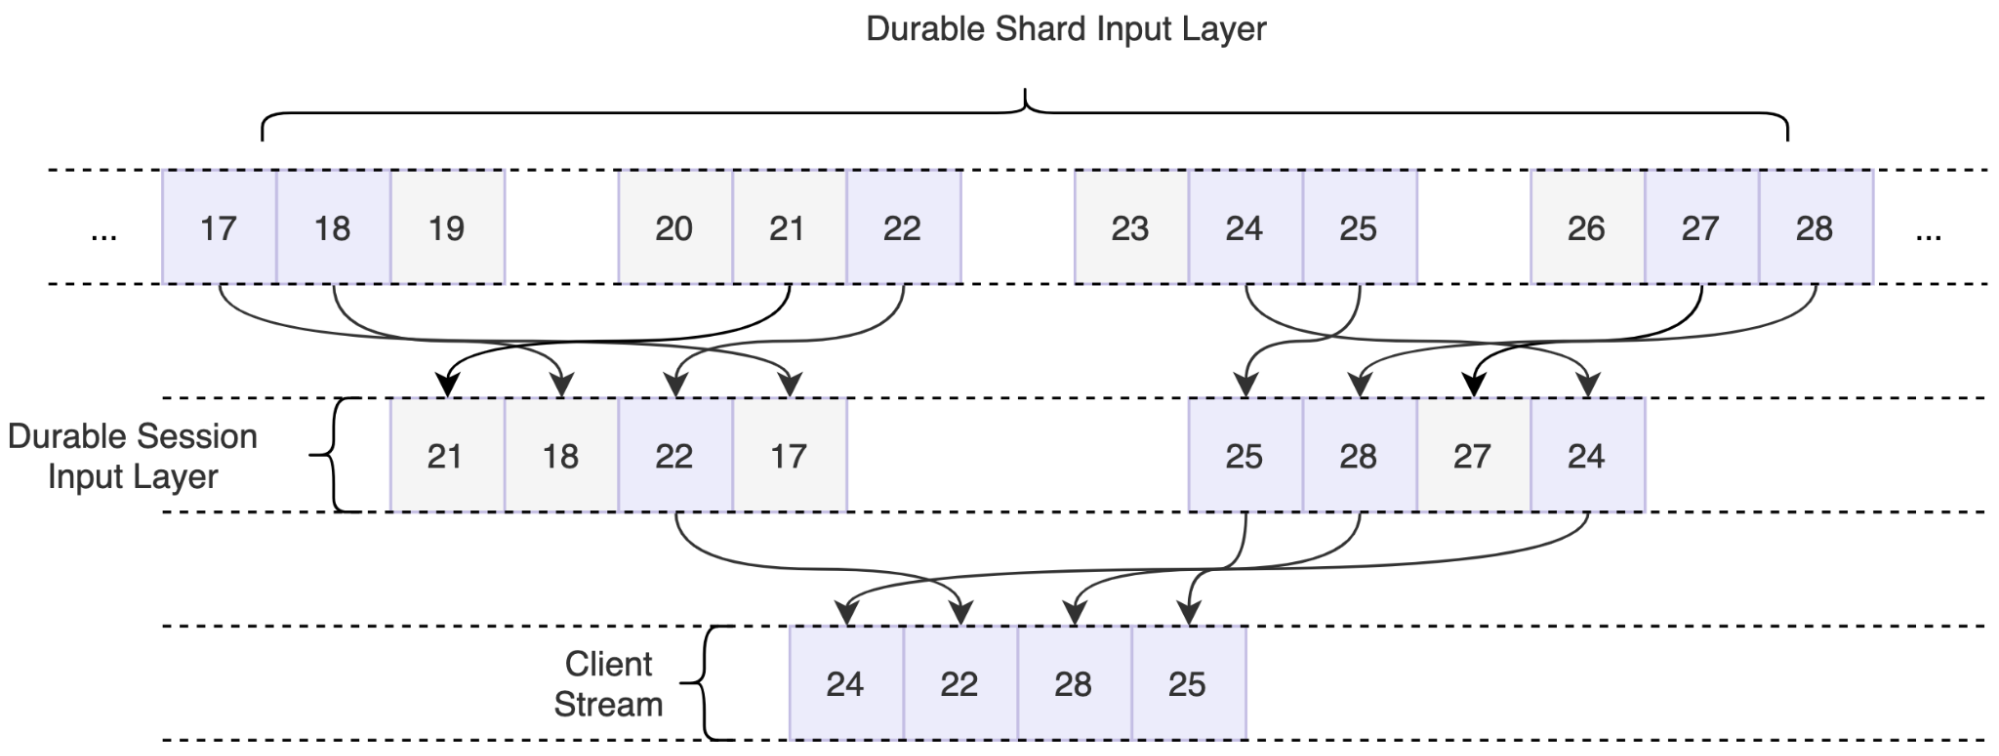 We have four Durable Shard input layers with three different events each. The Durable Shards merge these inputs together, using the reservoir sampling process, taking a maximum of four samples each. The outputs of the Durable Shards are then merged again, forming the final stream which is sent to the client